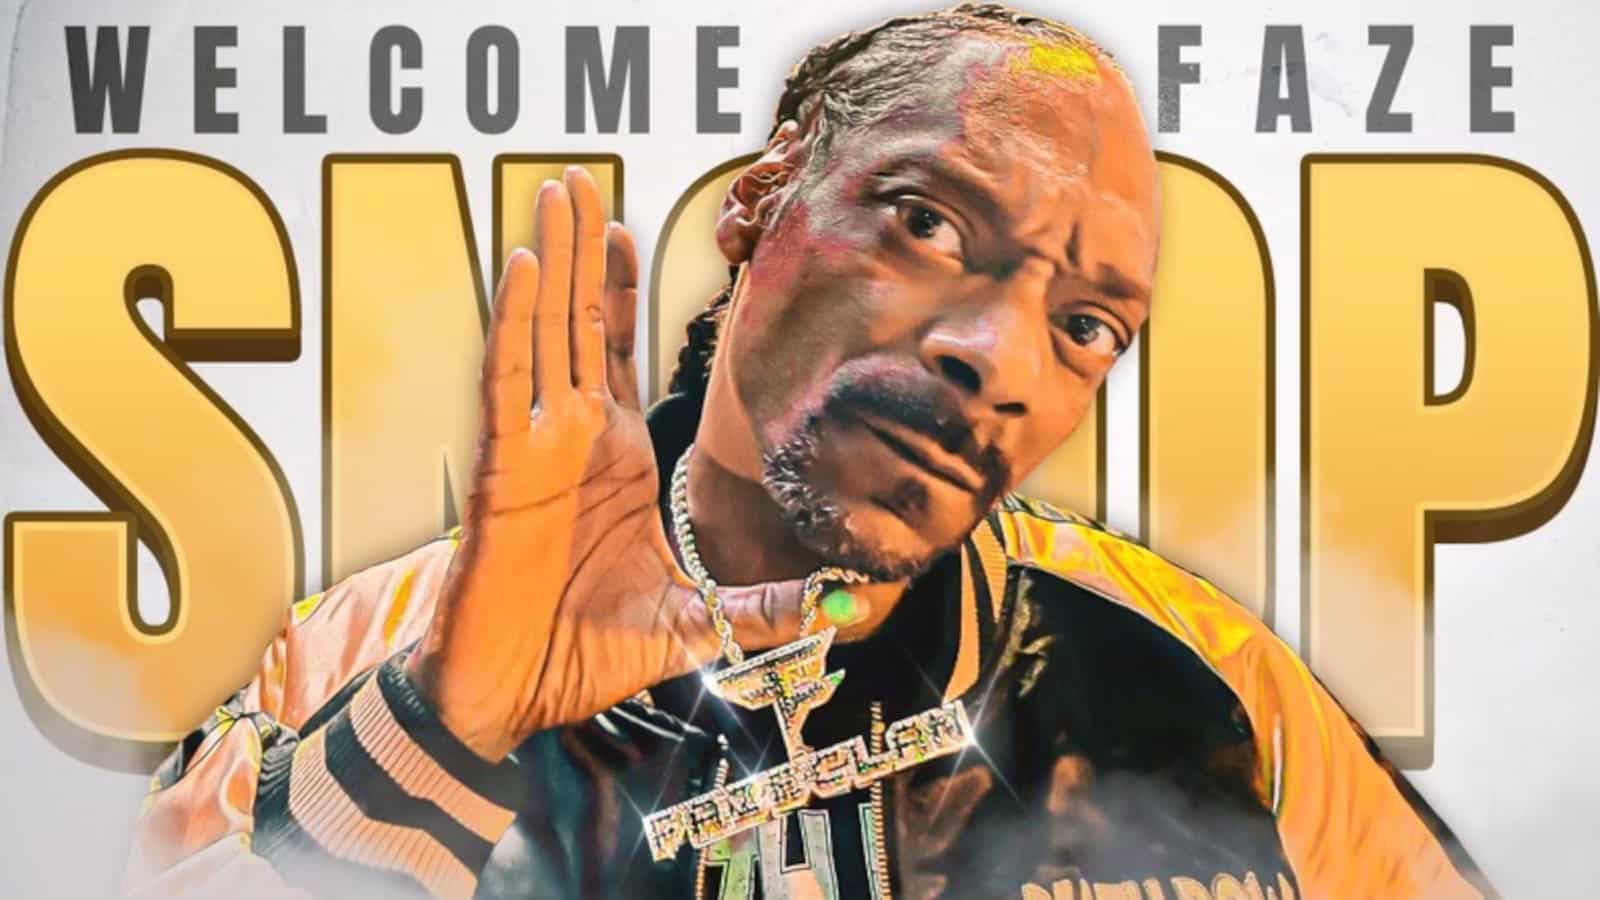 West Iz Back by Snoop Dogg & the Game (CD, 2016) for sale online